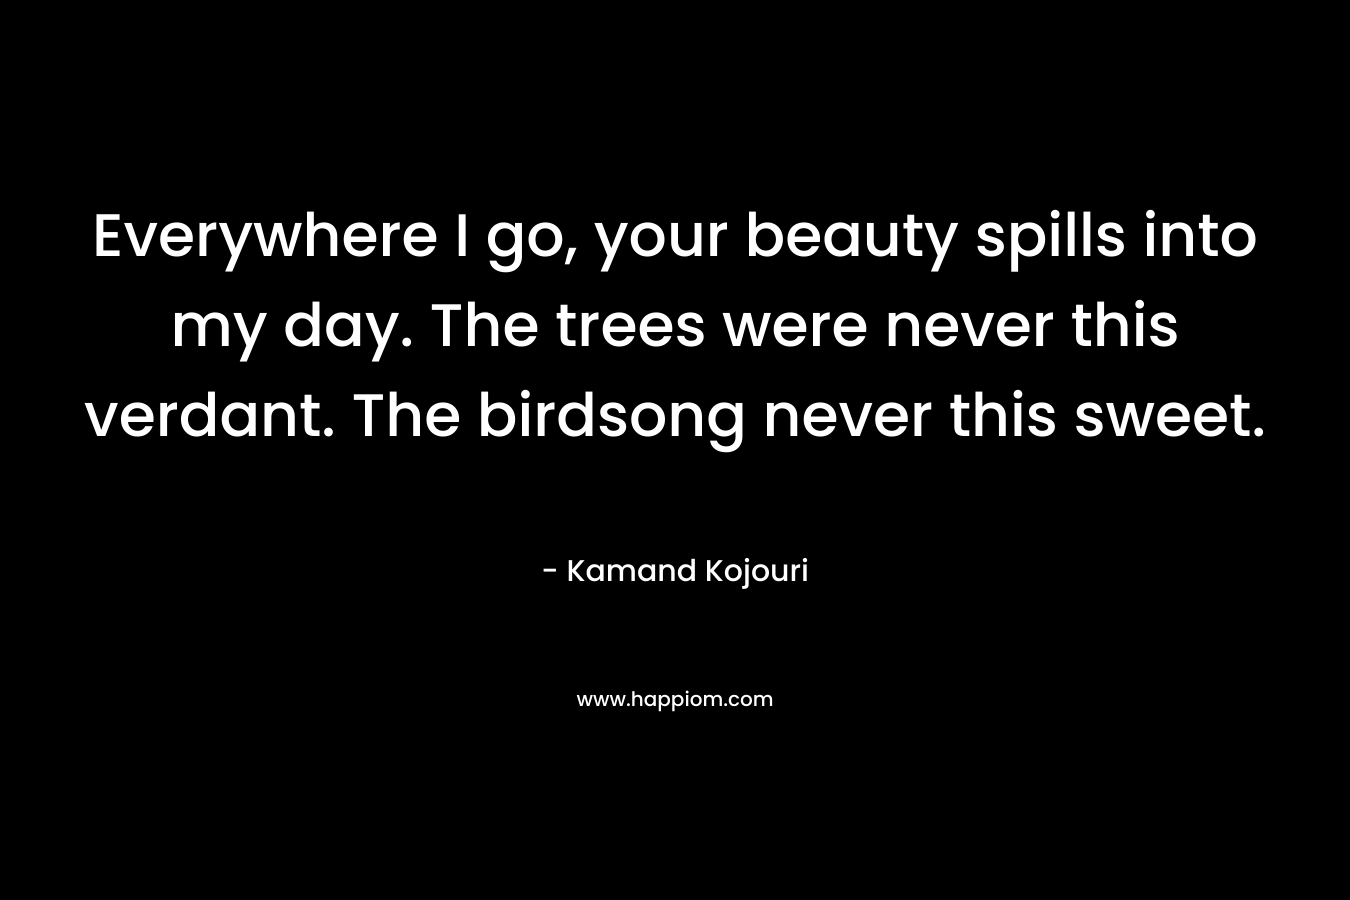 Everywhere I go, your beauty spills into my day. The trees were never this verdant. The birdsong never this sweet. – Kamand Kojouri